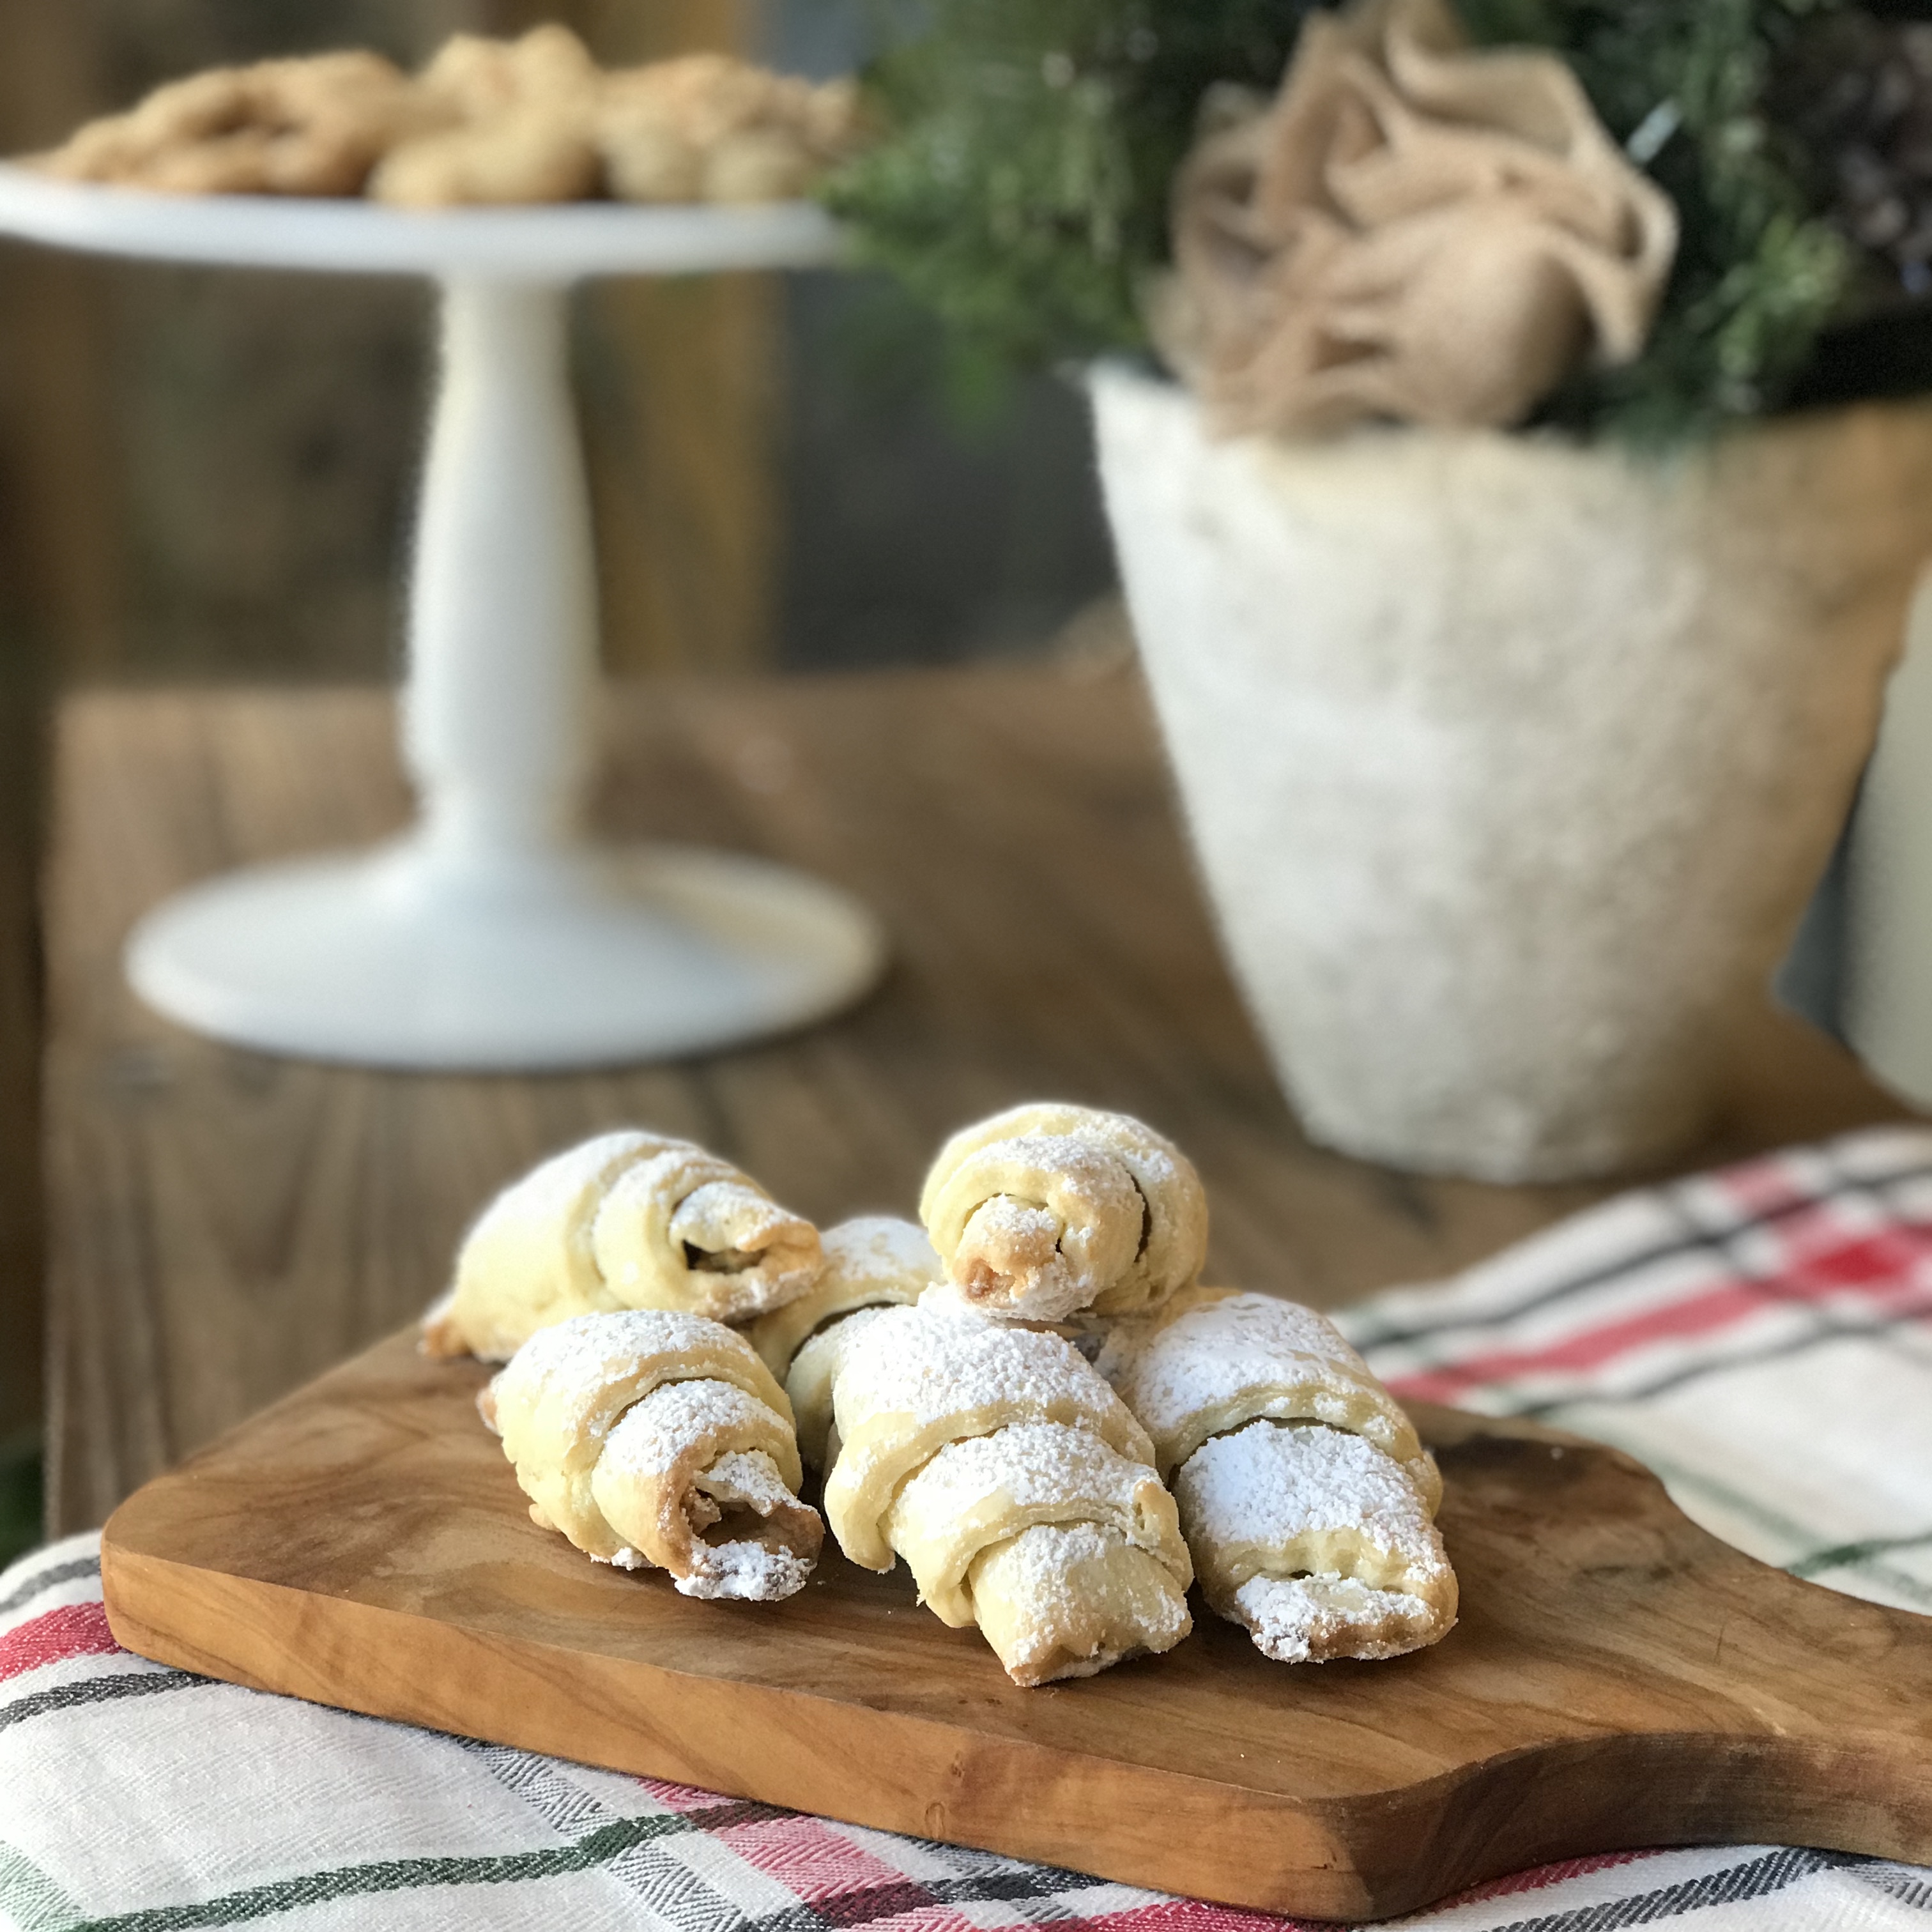 Croatian Walnut Kifle Cookies Here is my favorite gingerbread cookies recipe and one of the most popular christmas cookie recipes on this website. croatian walnut kifle cookies